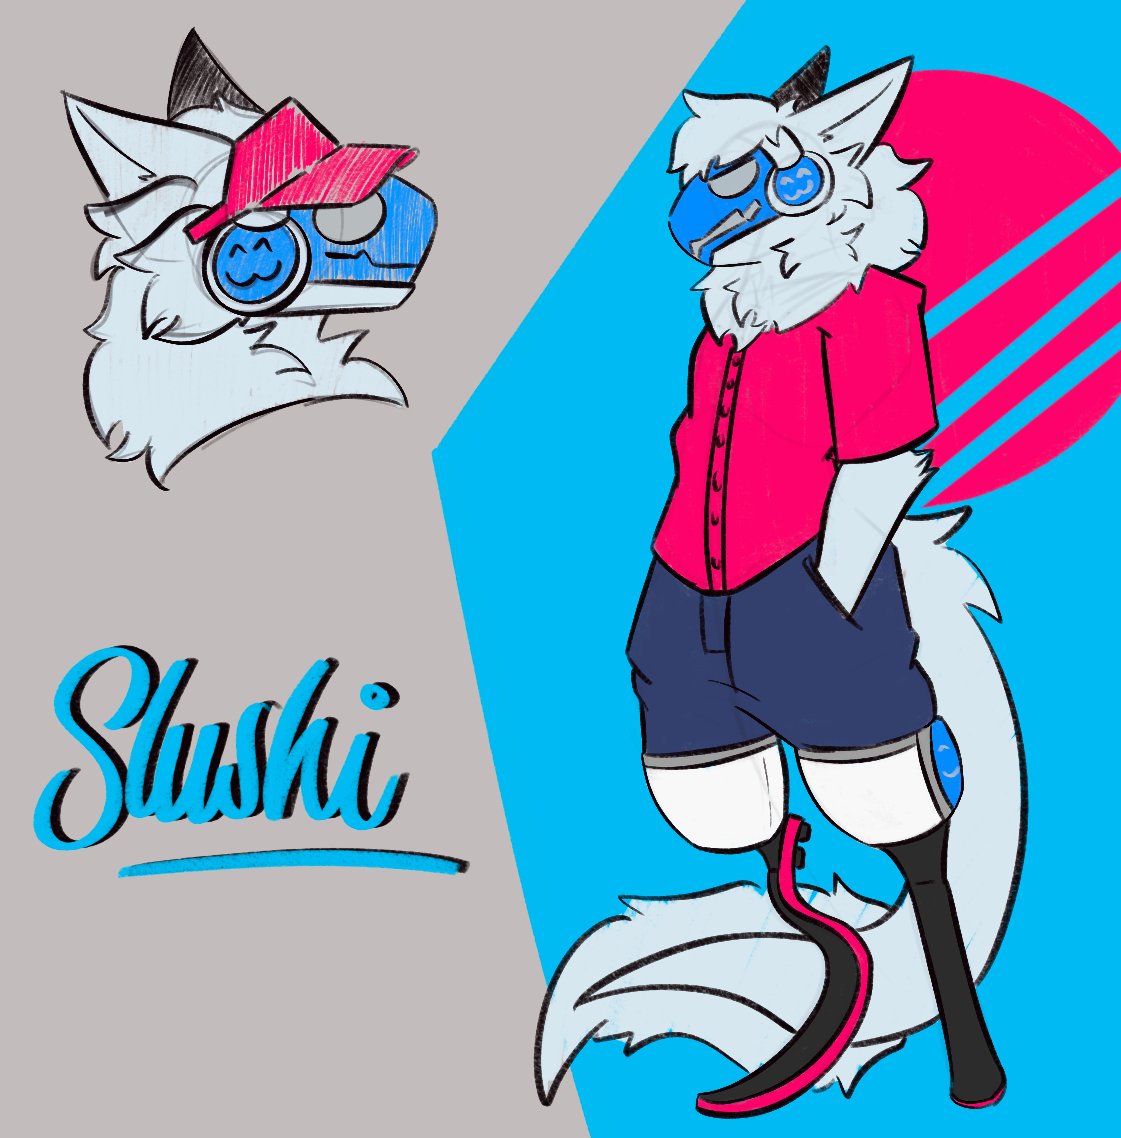 Drawing the blades was really fun
Character is Slushi, made by @GatoTacato